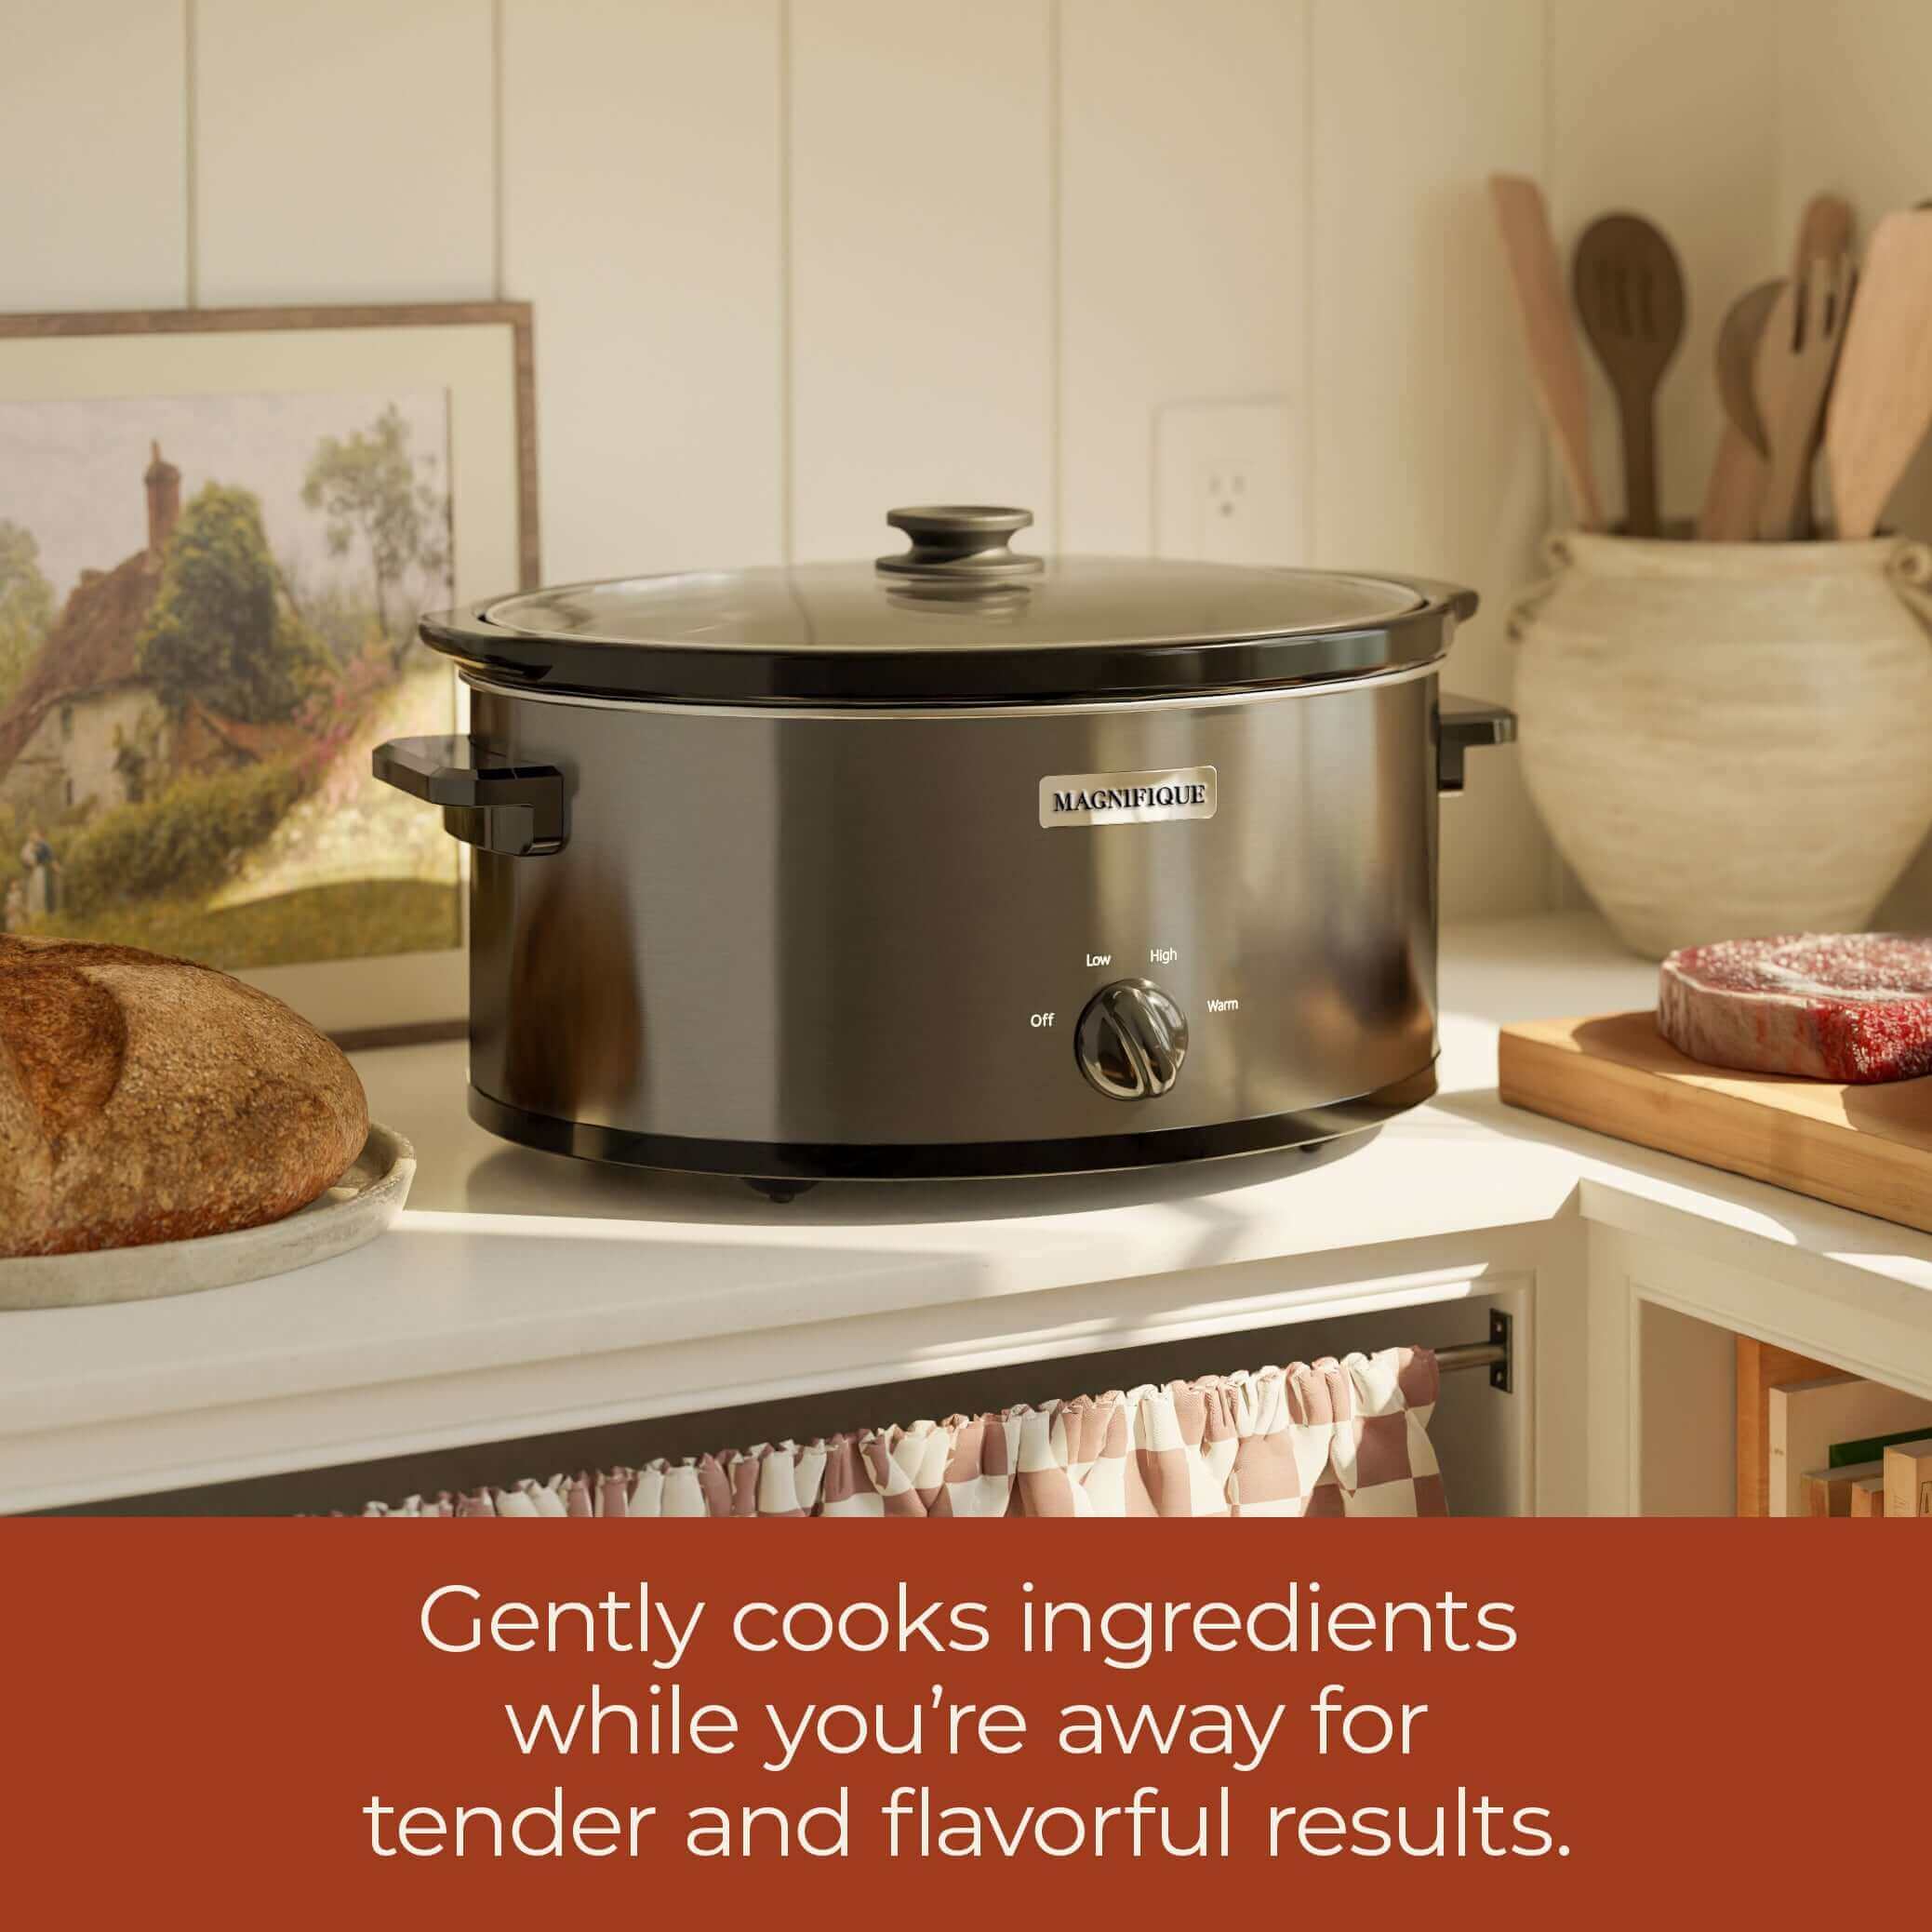 Cuisinart 6-Quart Stainless Steel Oval Slow Cooker in the Slow